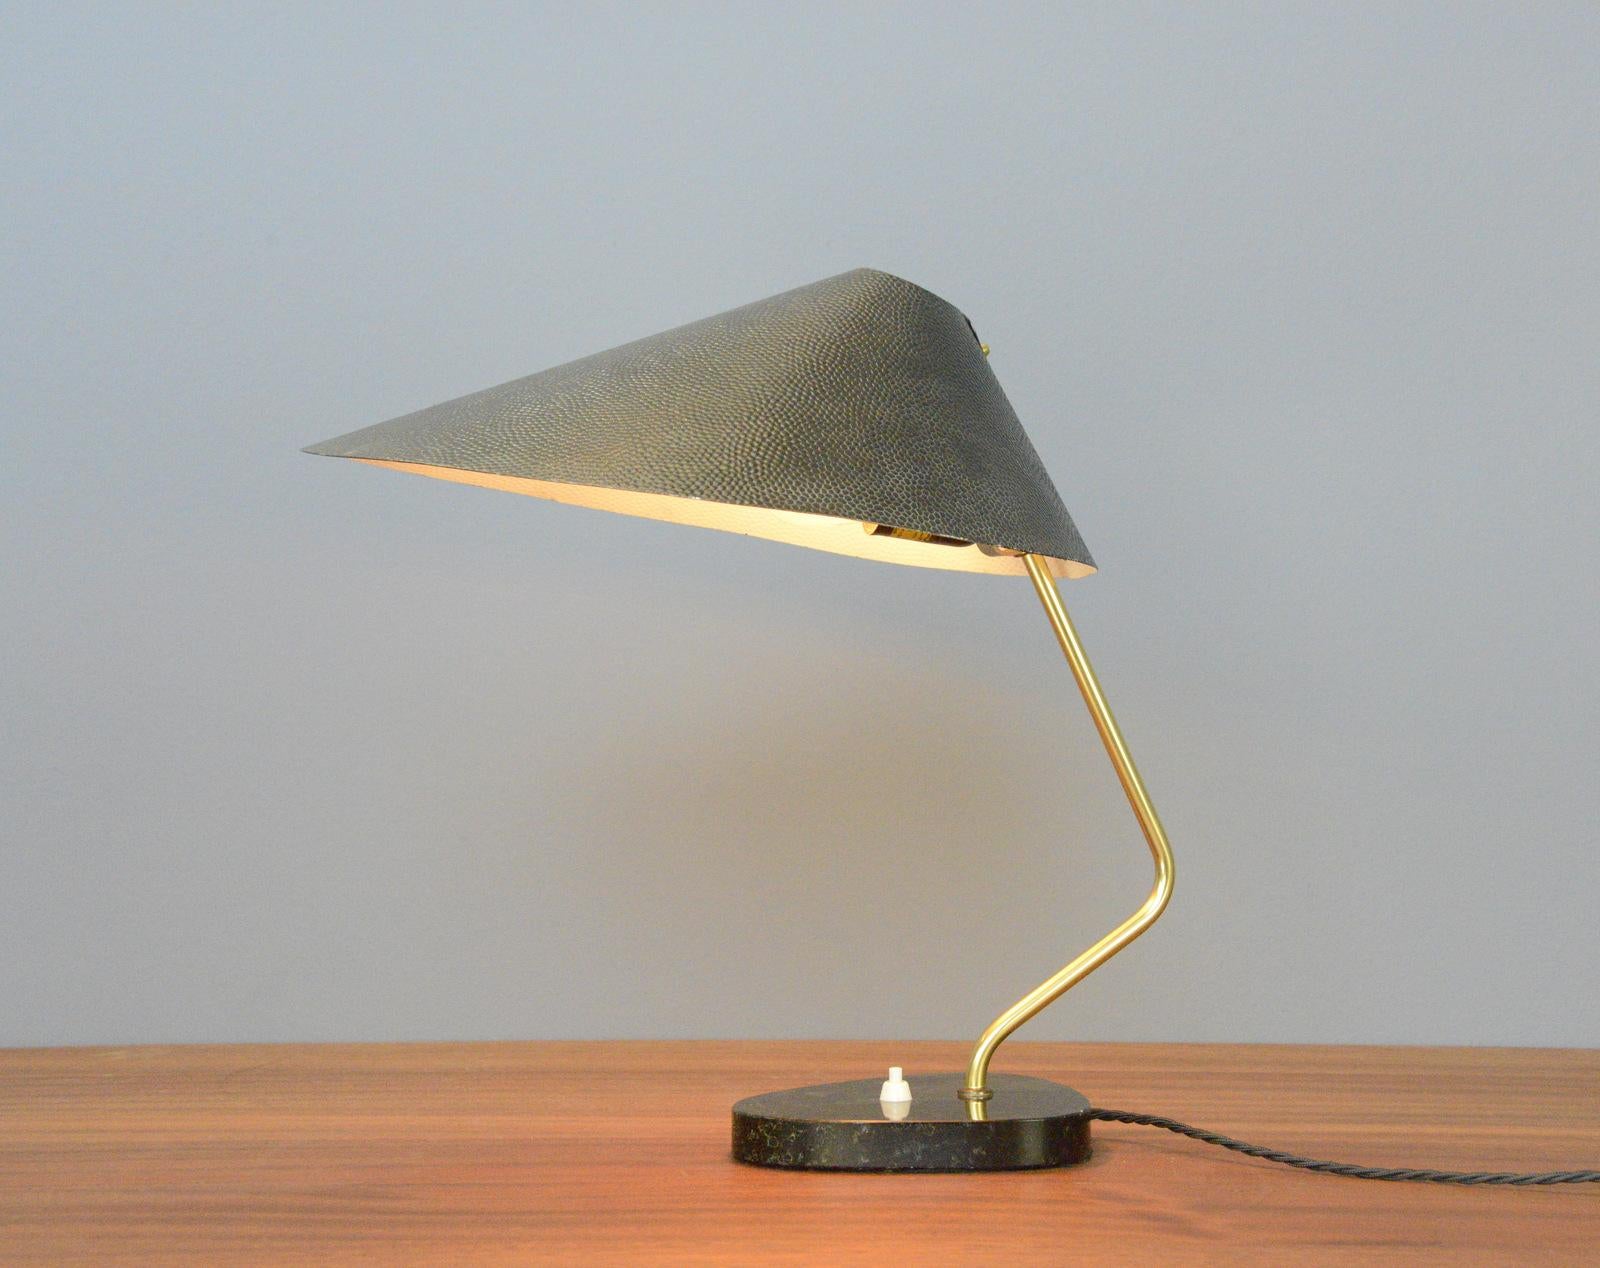 Mid century East German table lamps Circa 1960s

- Black marble bases
- On/Off switches on the bases
- Takes E27 fitting bulbs
- Textured shades
- Brass arm
- East German ~ 1960s
- 33cm wide x 43cm deep x 43cm tall

Condition